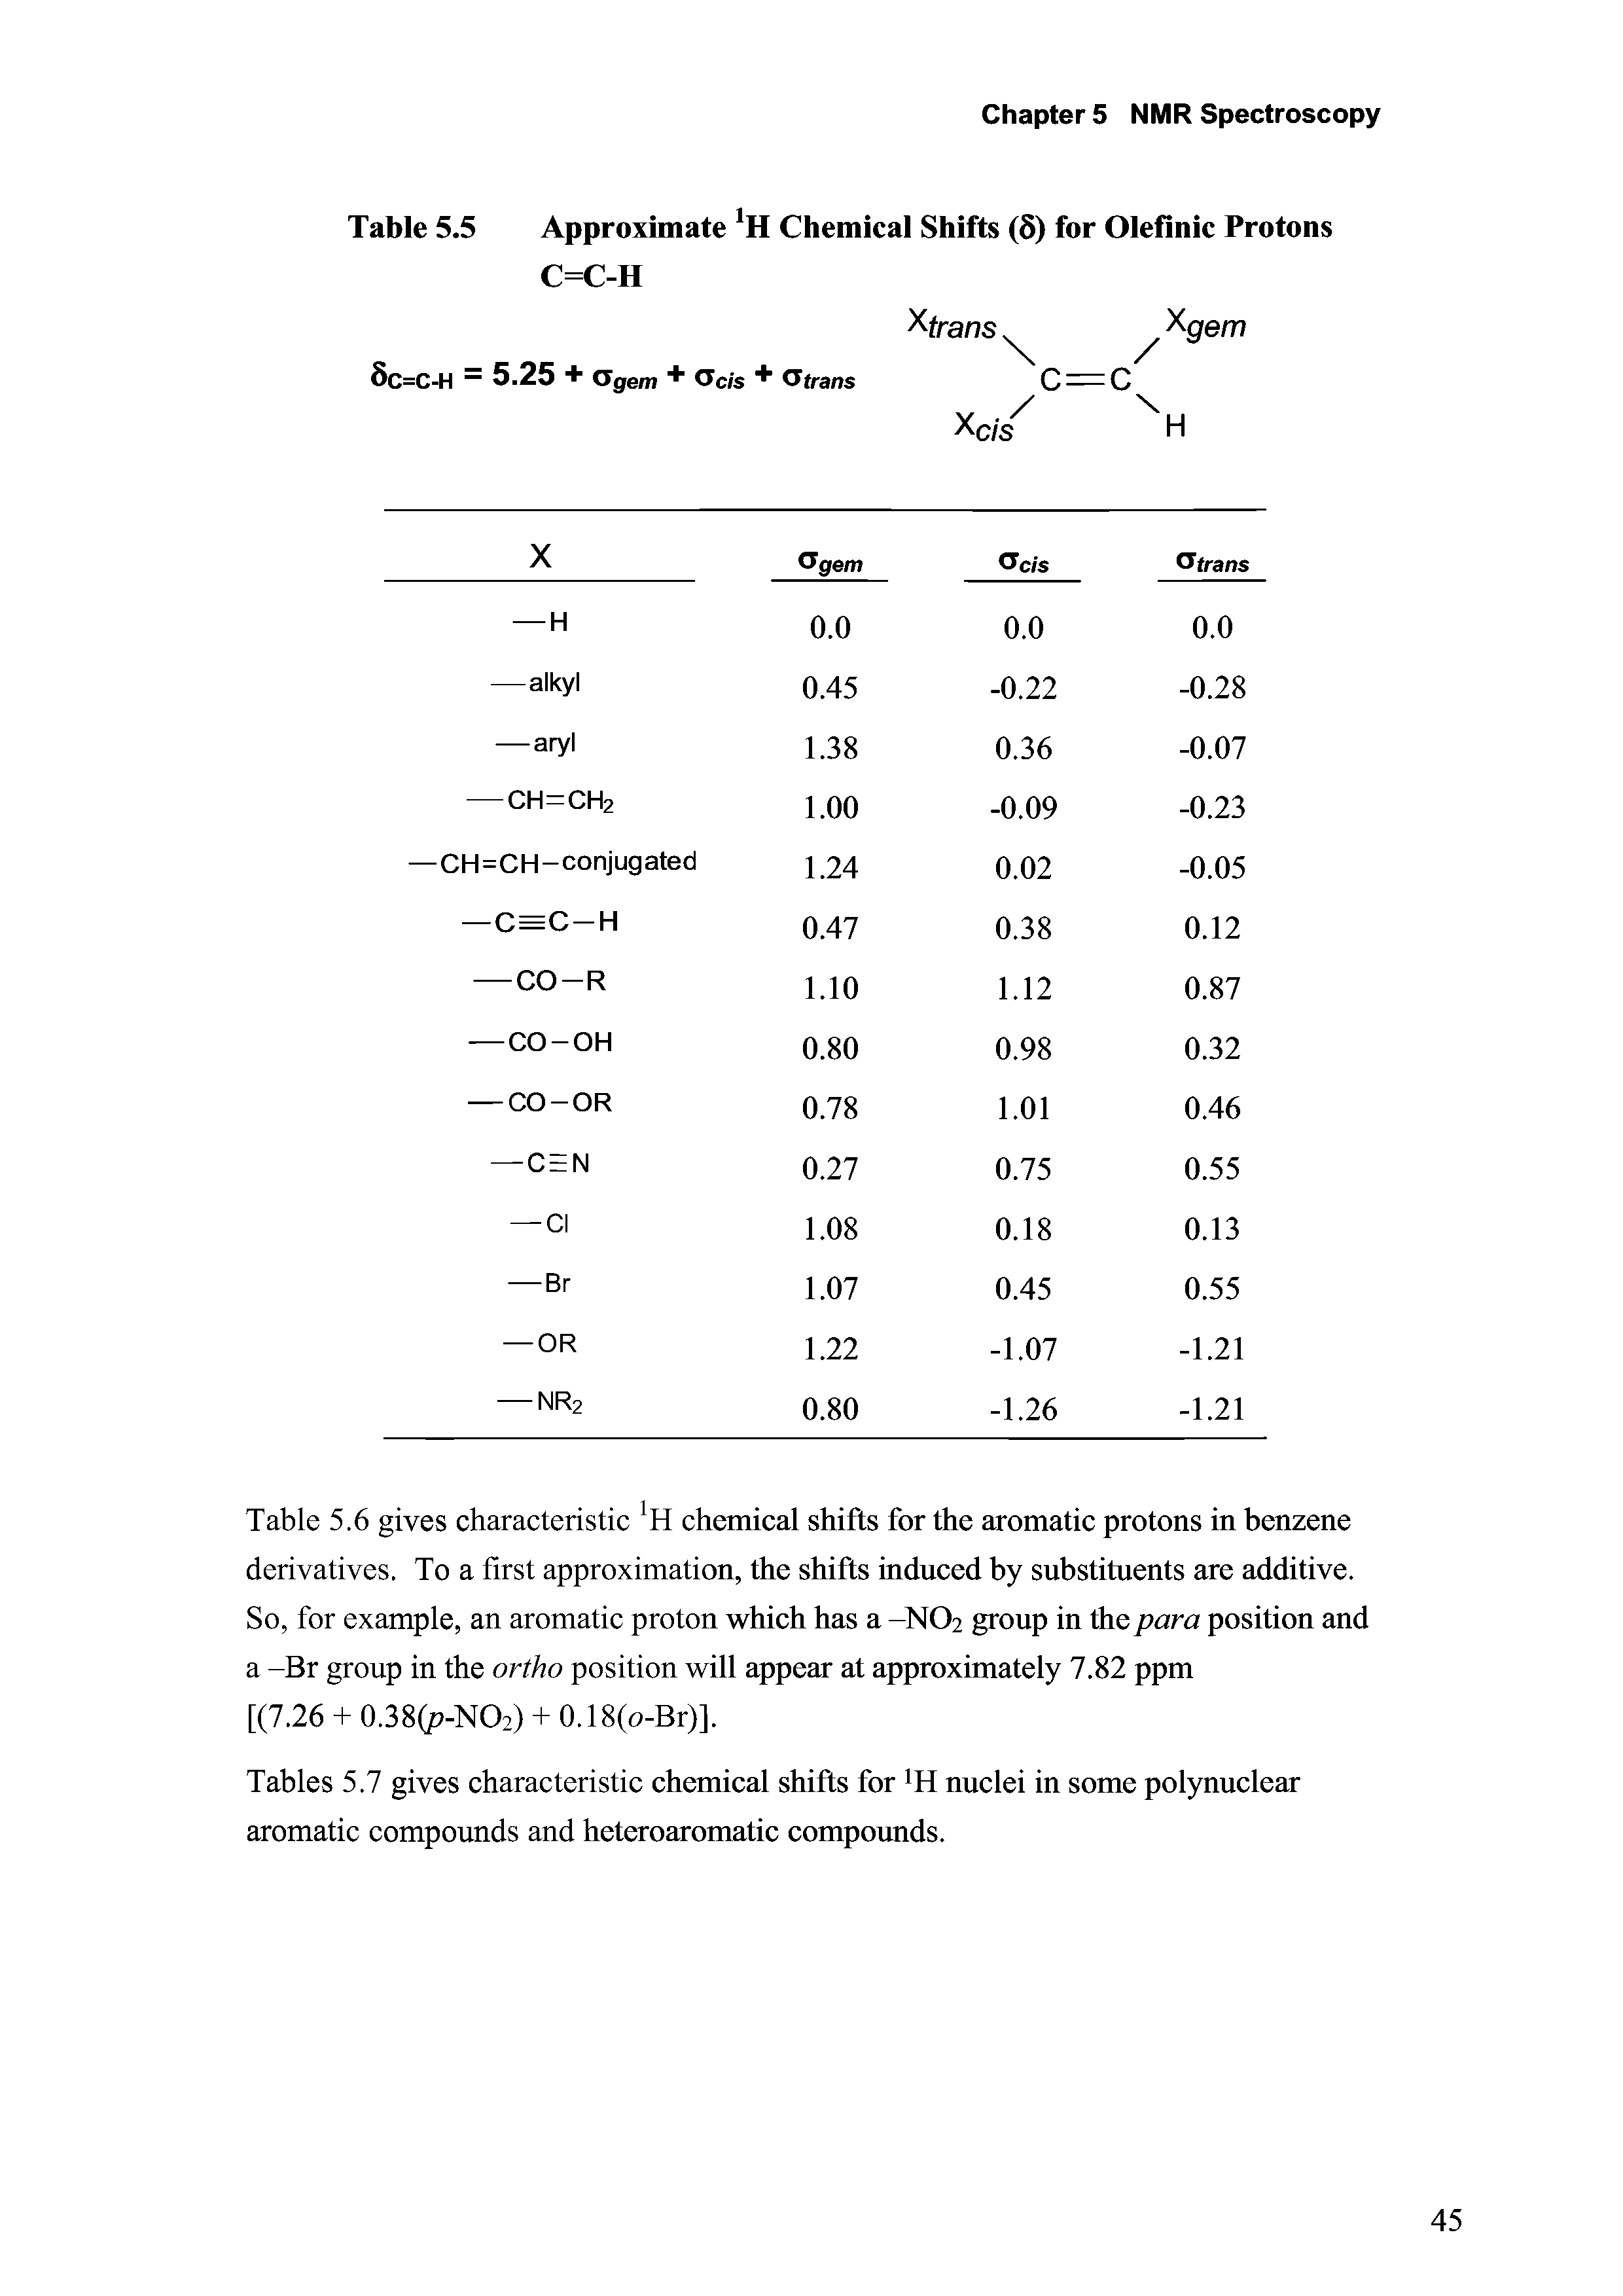 Table 5.5 Approximate H Chemical Shifts (5) for Olefinic Protons C=C-H...